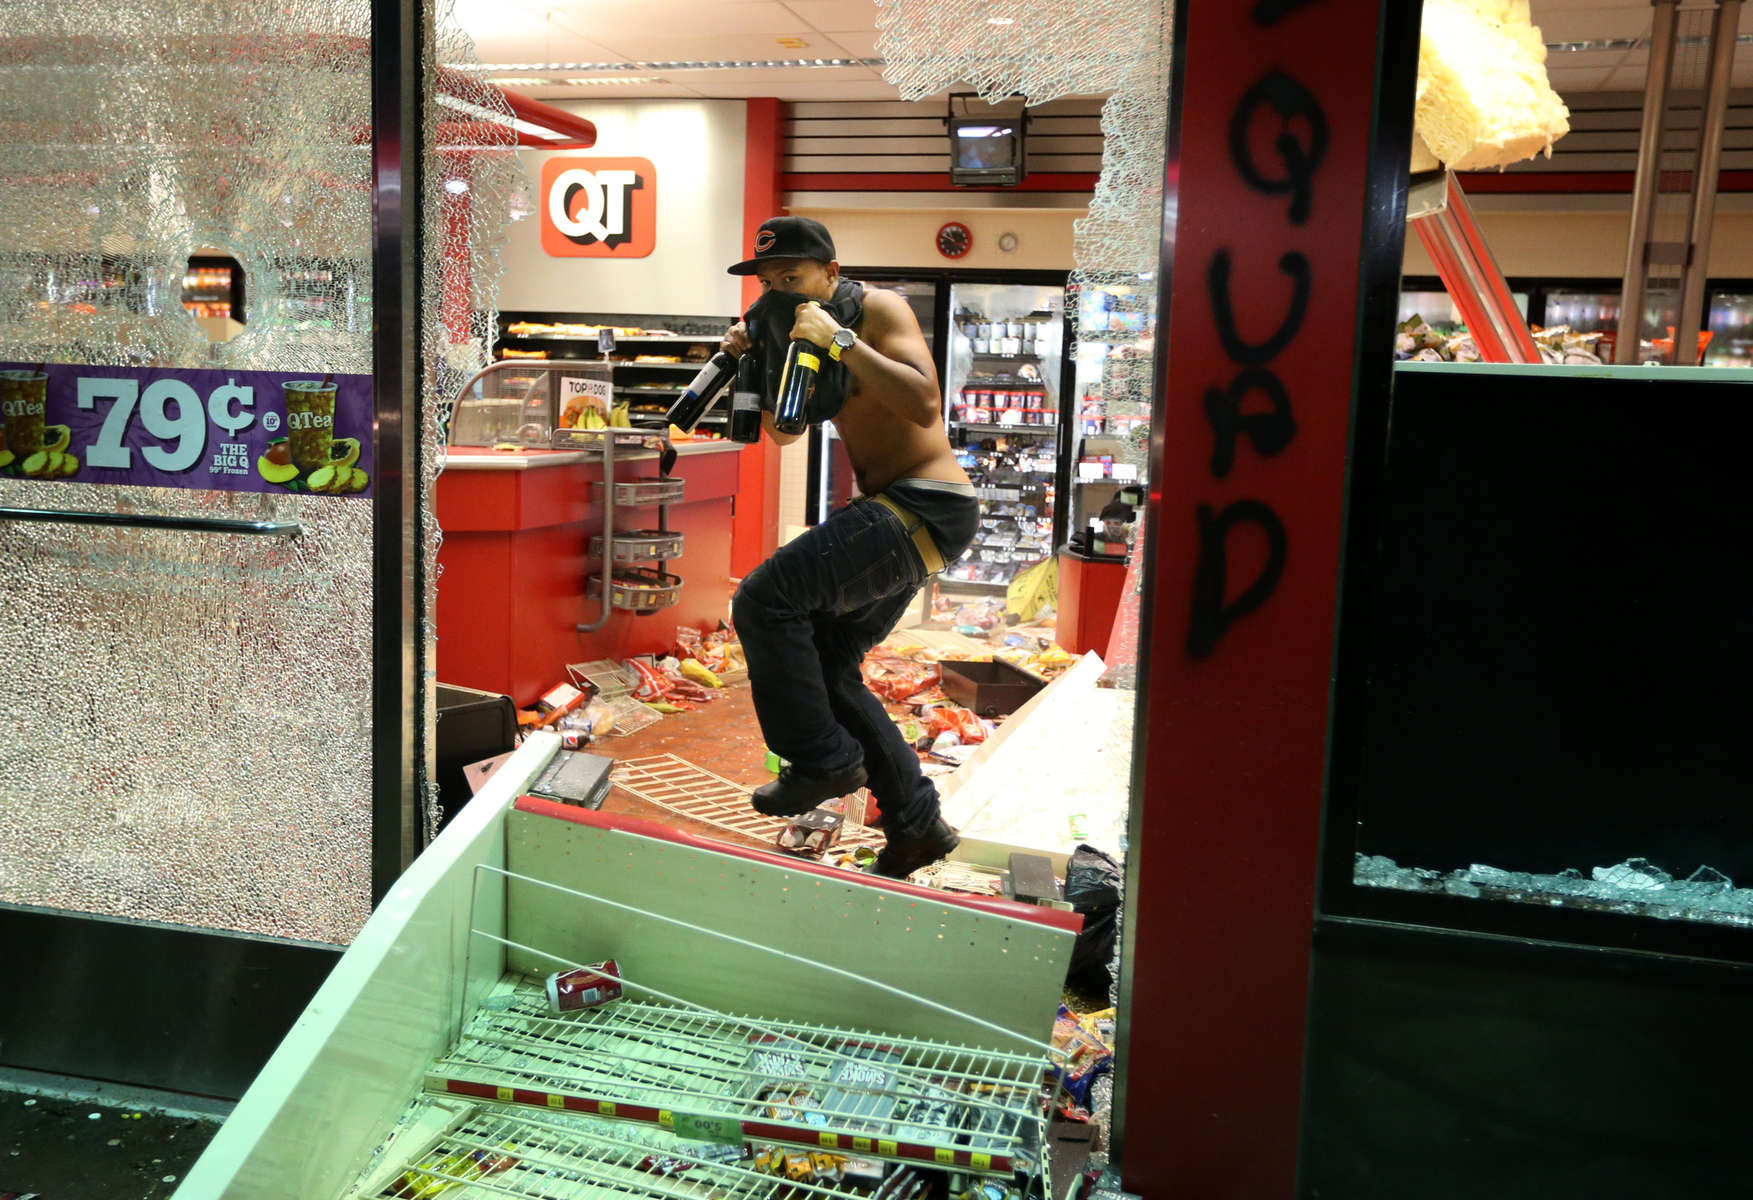 A looter takes items from inside the QuikTrip in 9400 block of W. Florissant Avenue in Ferguson, Mo. on Sunday, Aug. 10, 2014. Rioters set fire to the store about an hour later.